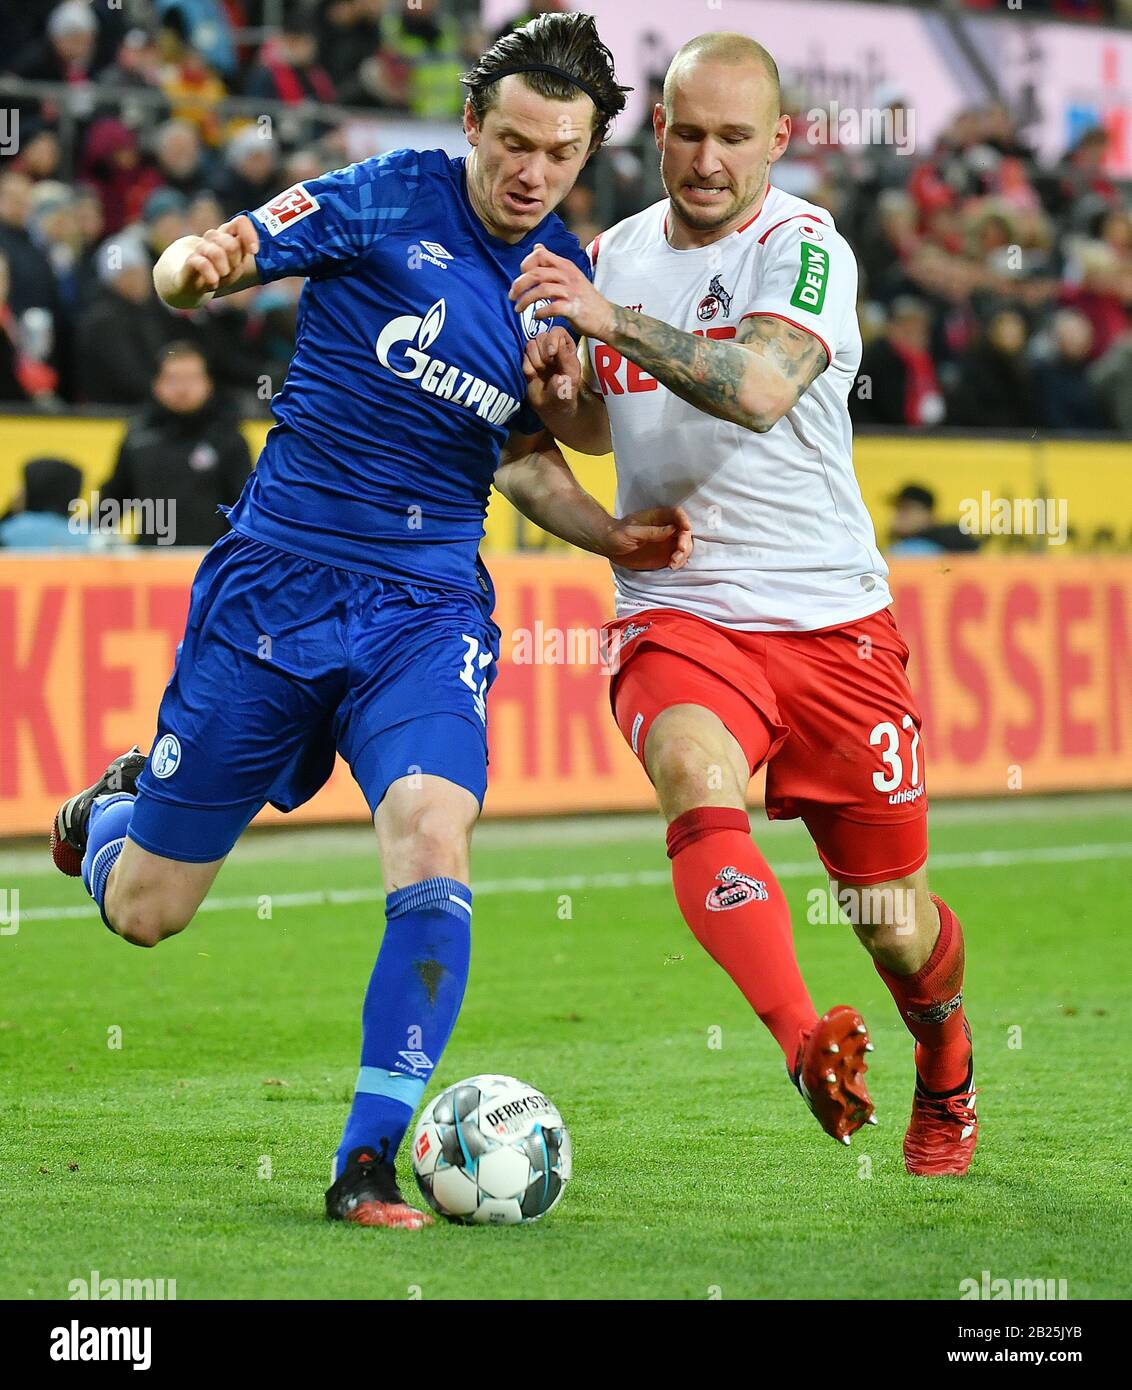 Cologne Germany 29th Feb 2020 Michael Gregoritsch L Of Schalke 04 Vies With Toni Leistner Of Cologne During A German Bundesliga Match Between Fc Cologne And Fc Schalke 04 In Cologne Germany